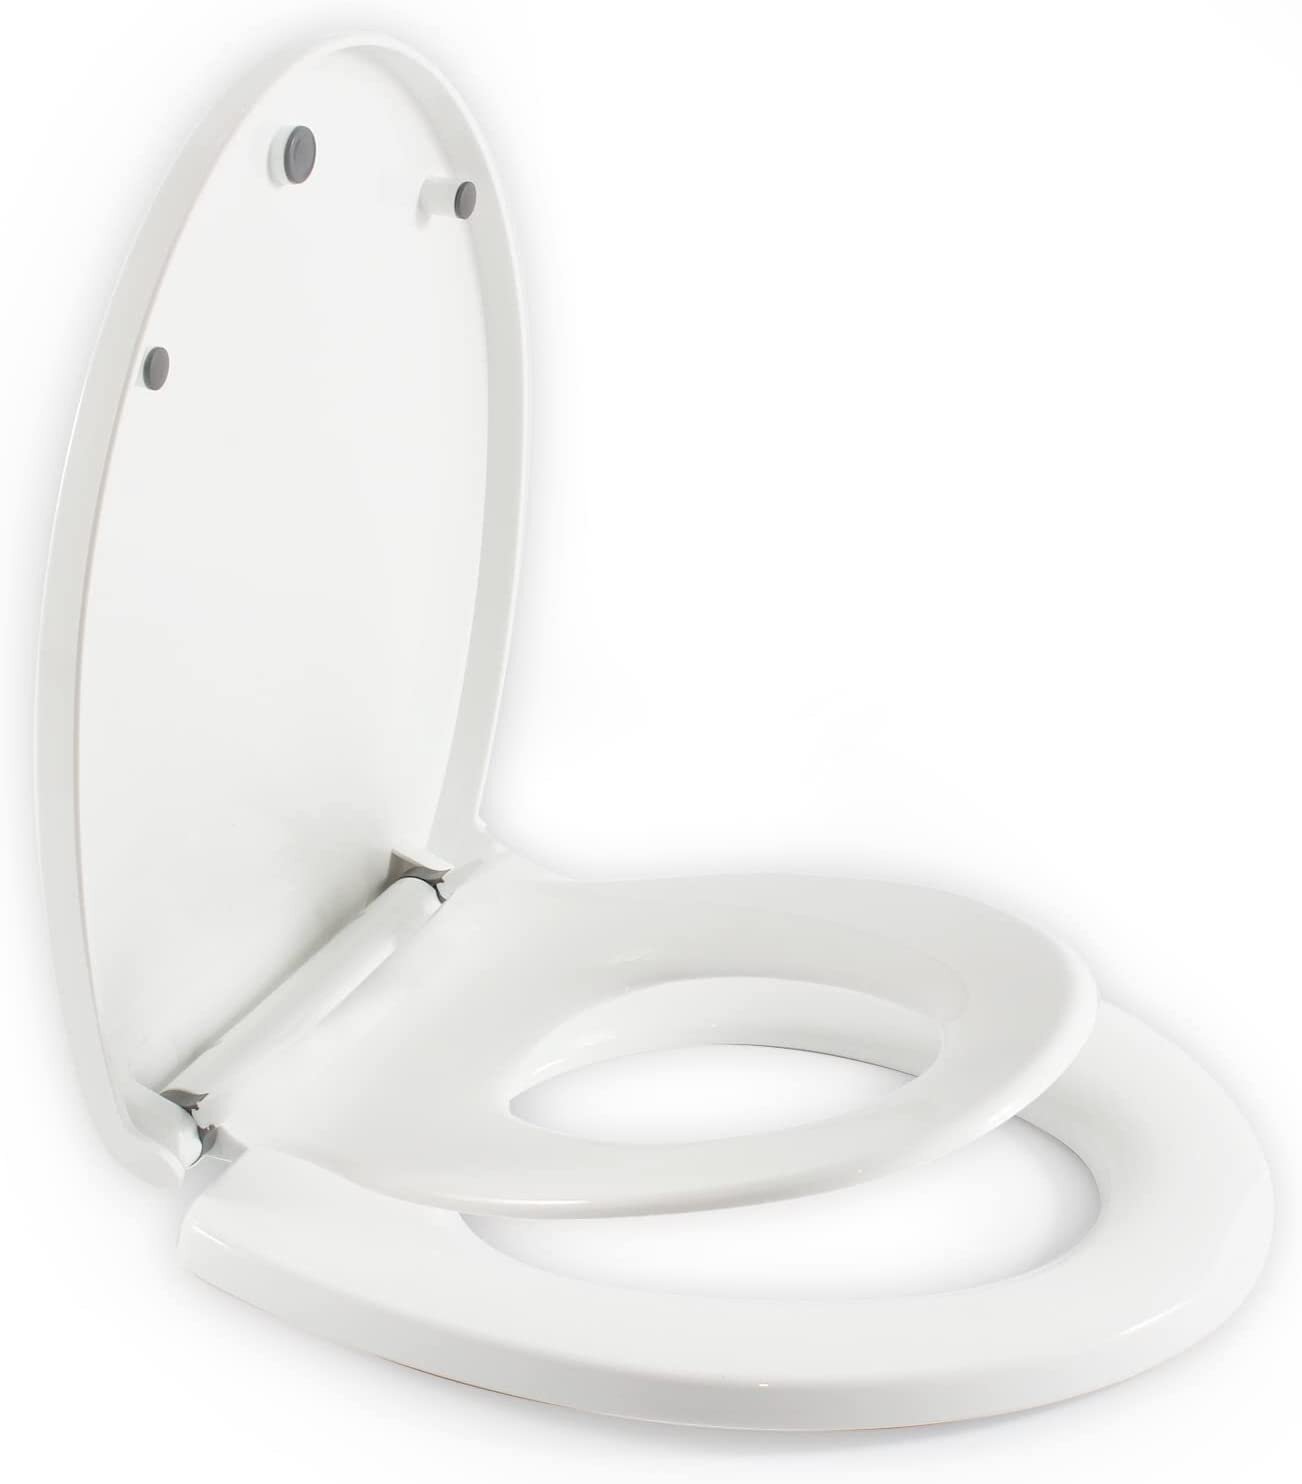 Topseat TinyHiney Round Potty Seat With Hinges